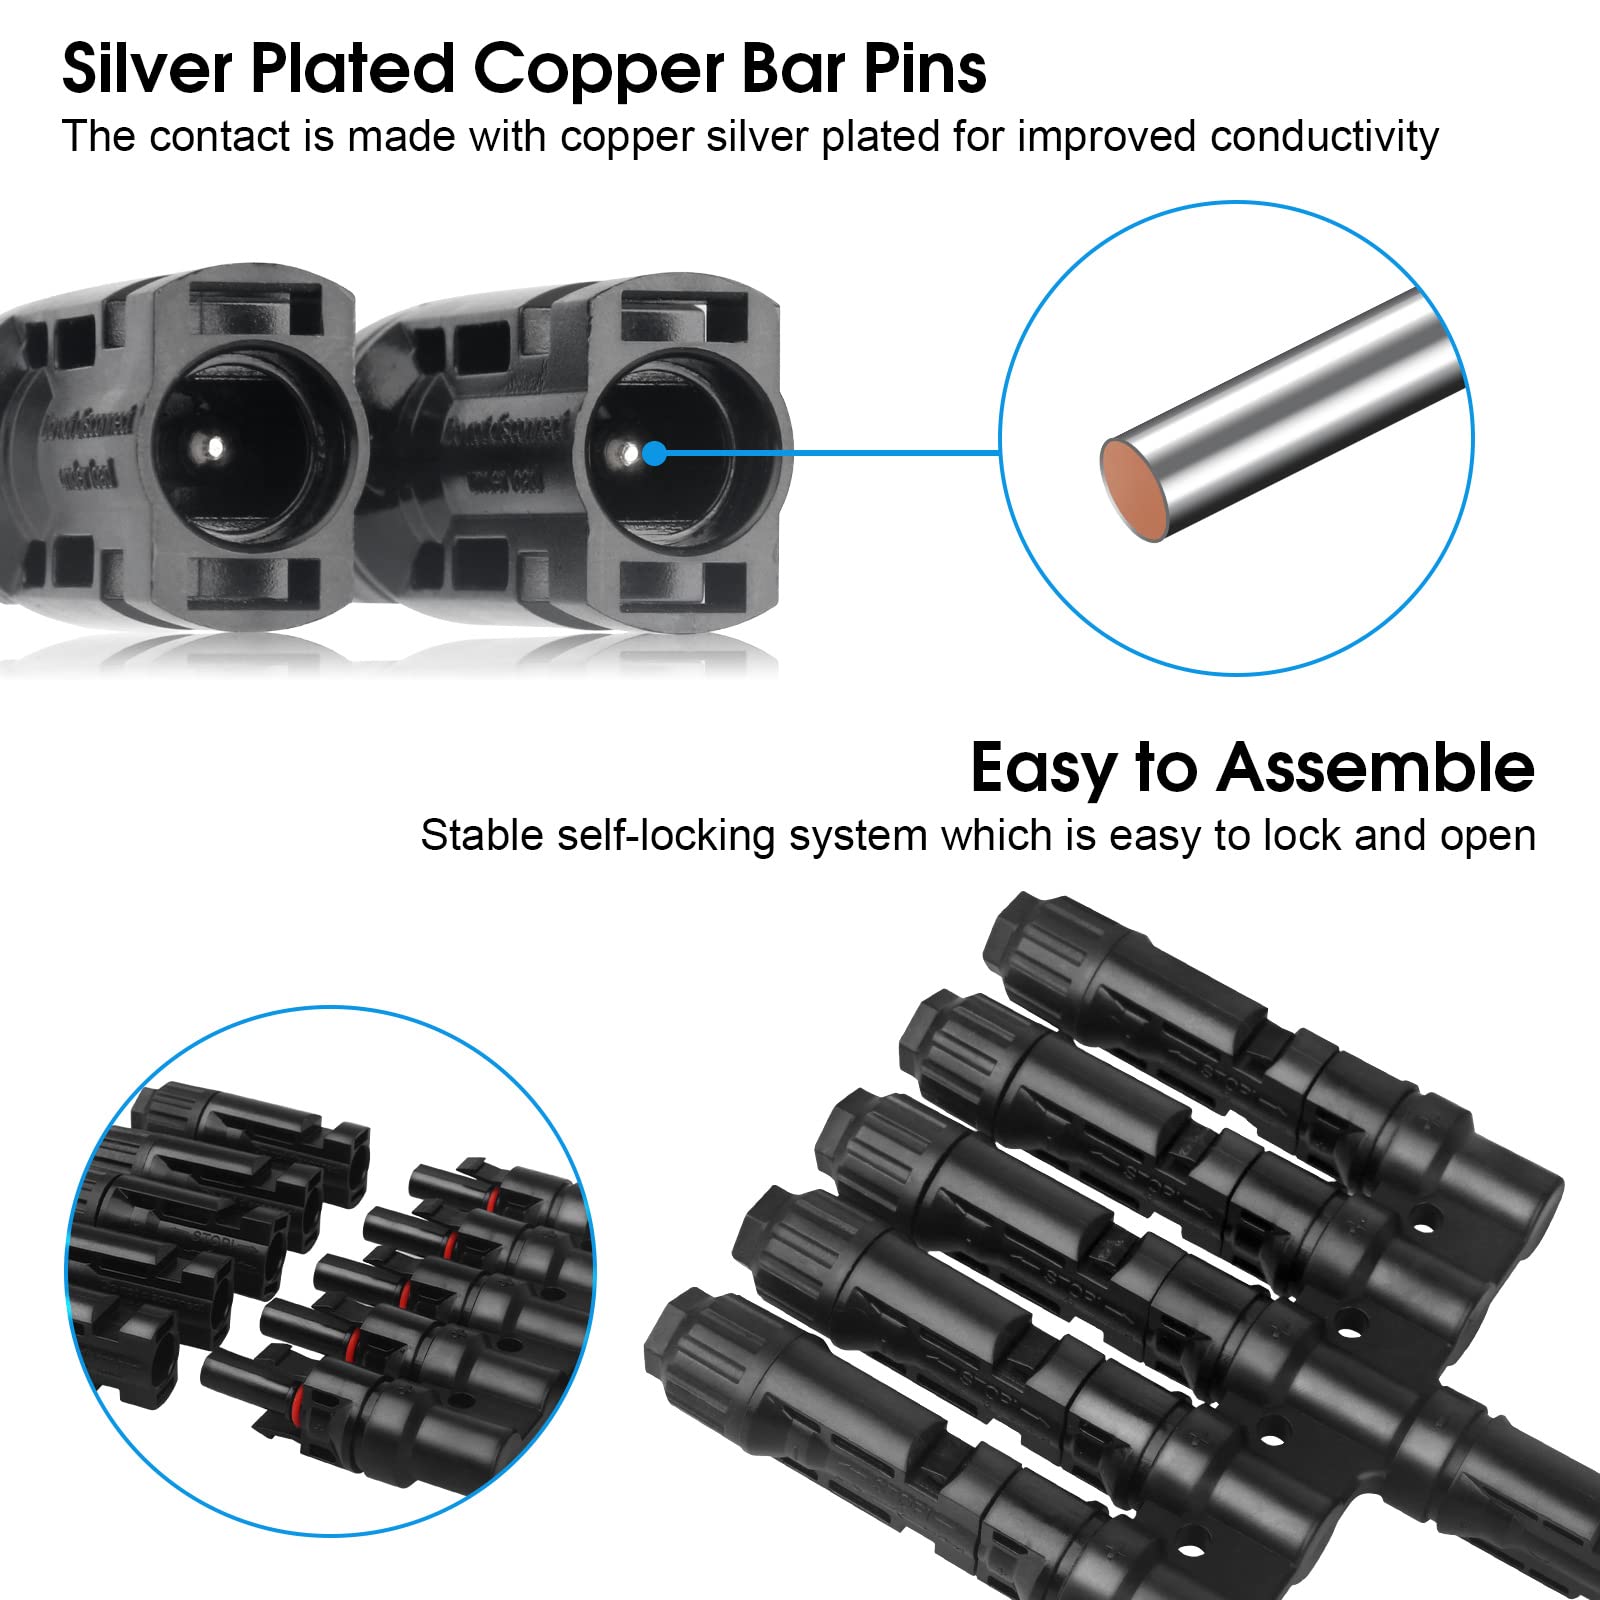 PAEKQ Solar Panel Connectors T Branch Connectors Cable Splitter Coupler 1 Male to 5 Female and 1 Female to 5 Male, Solar Cable connectors for Residential, Commercial Roofs, RVs (1 Pair)